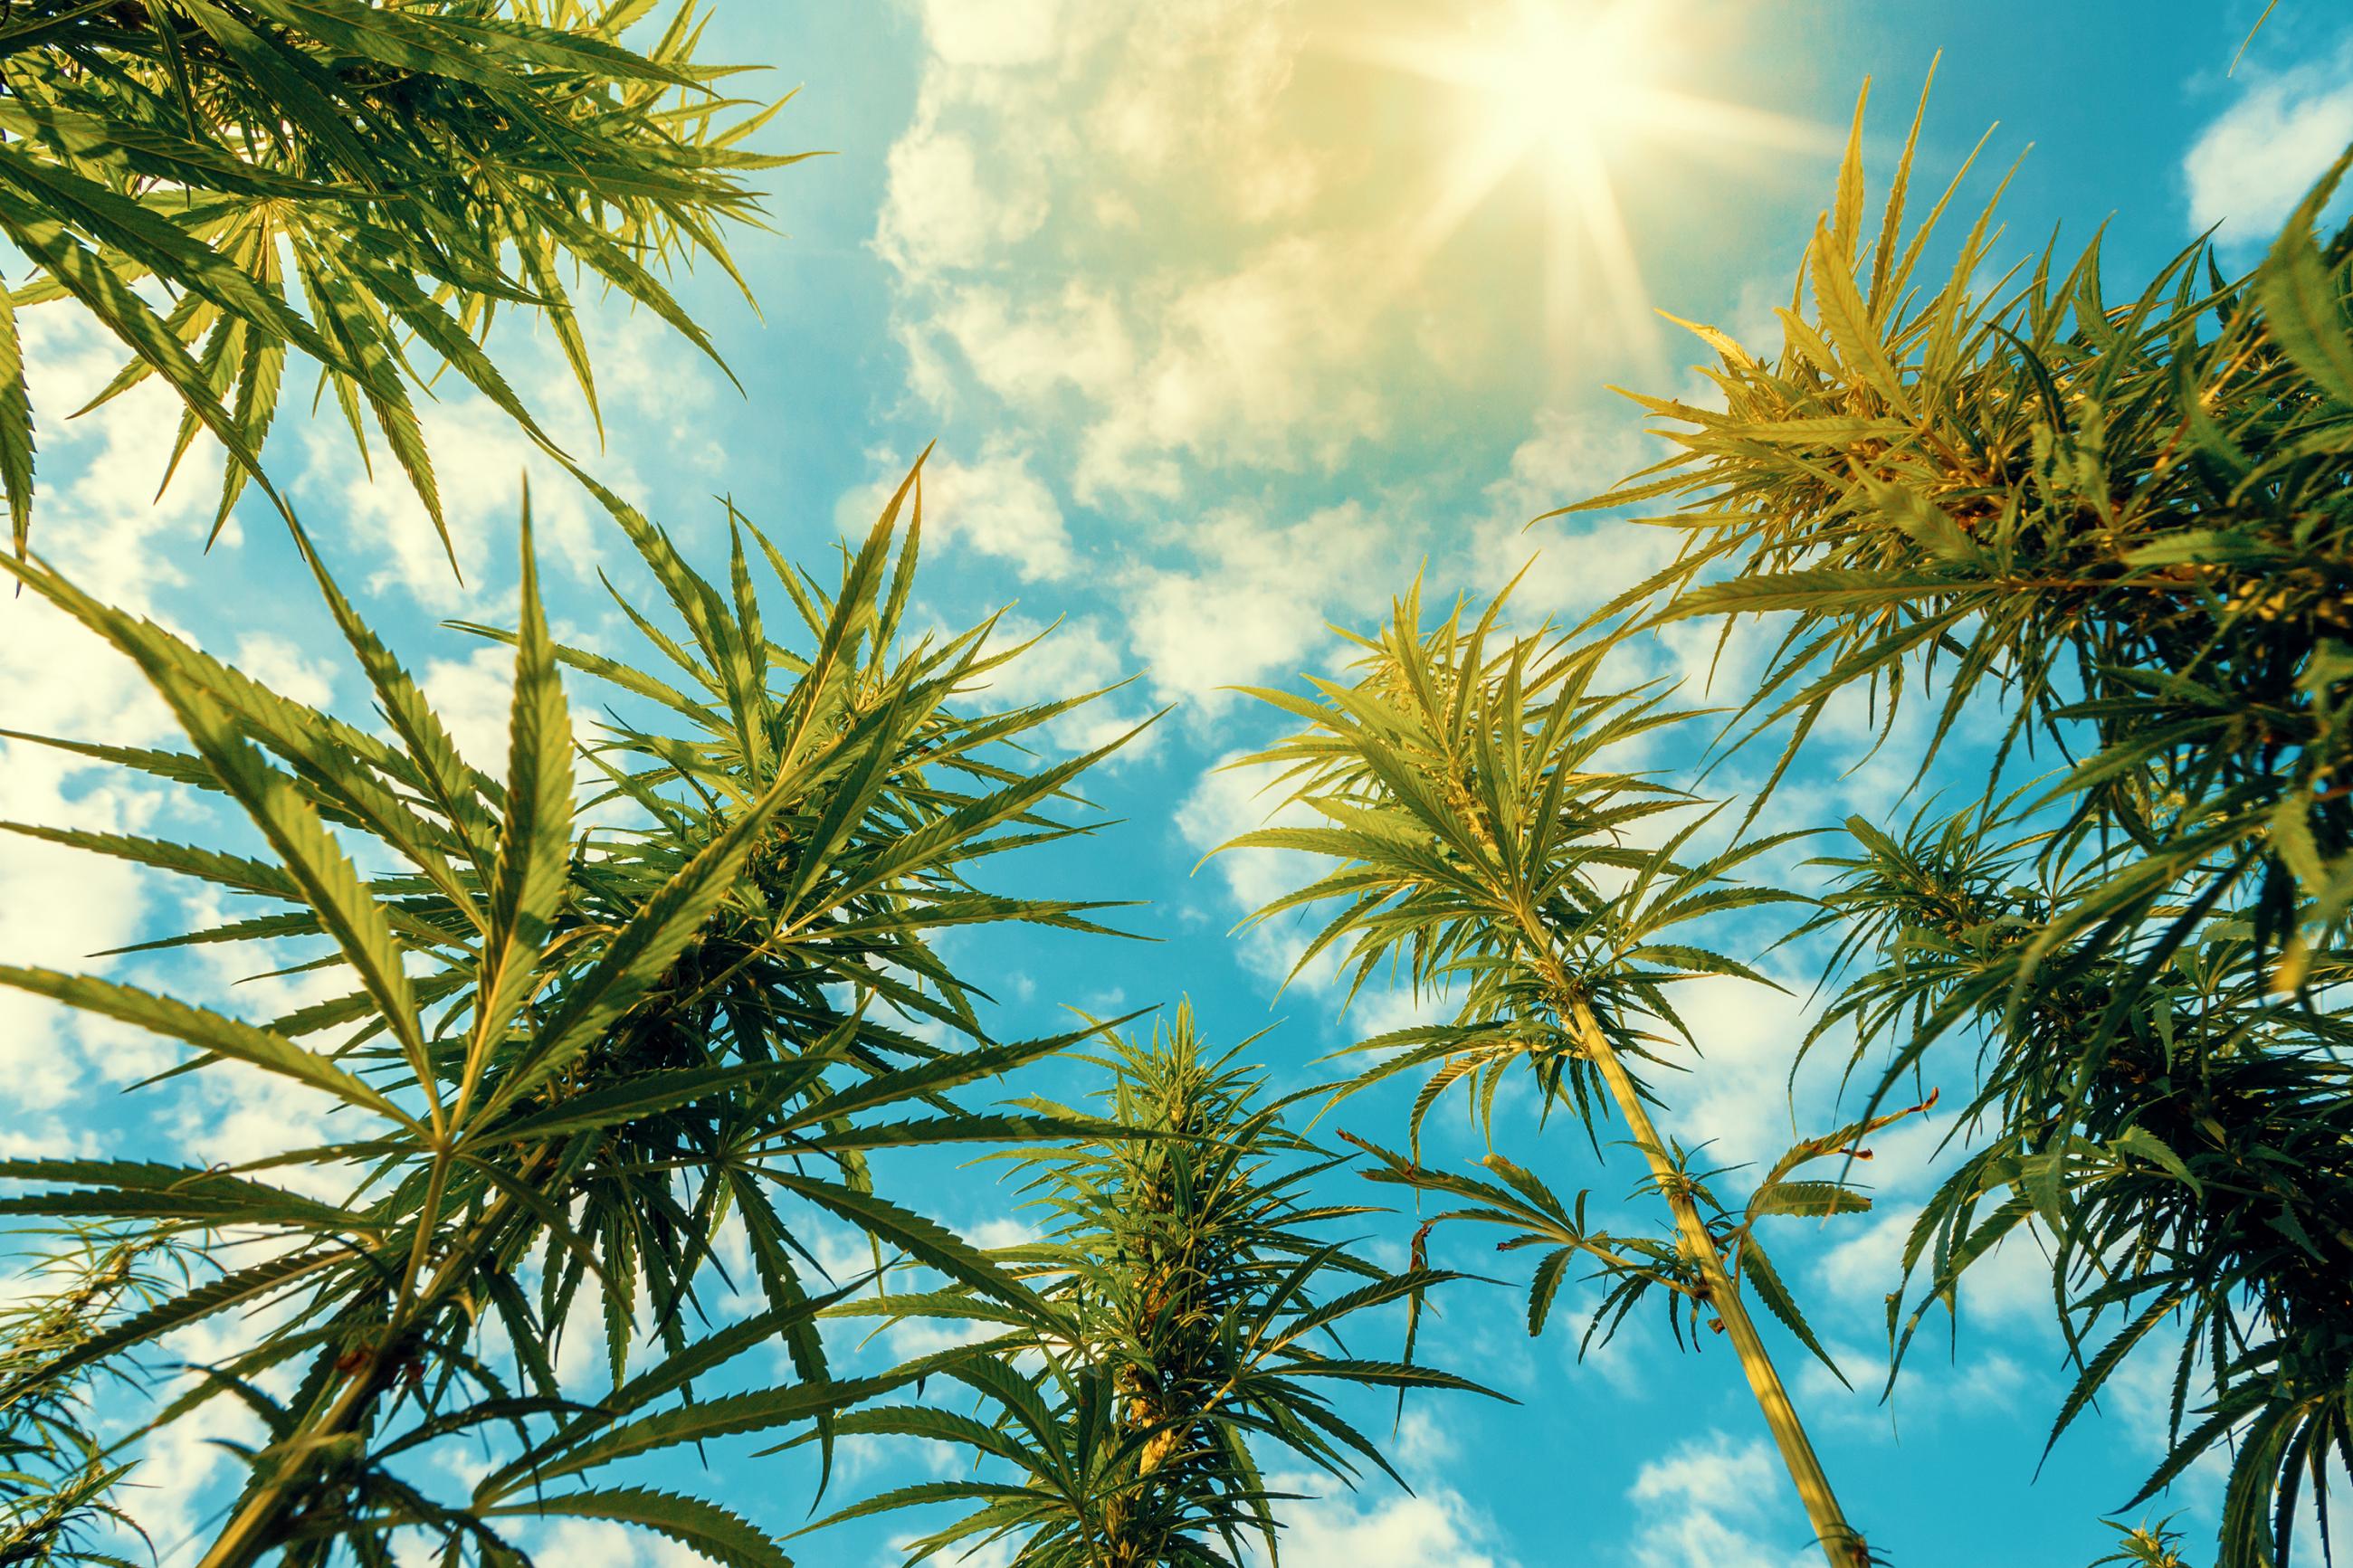 Cannabis plants shown against a blue sky background with clouds.